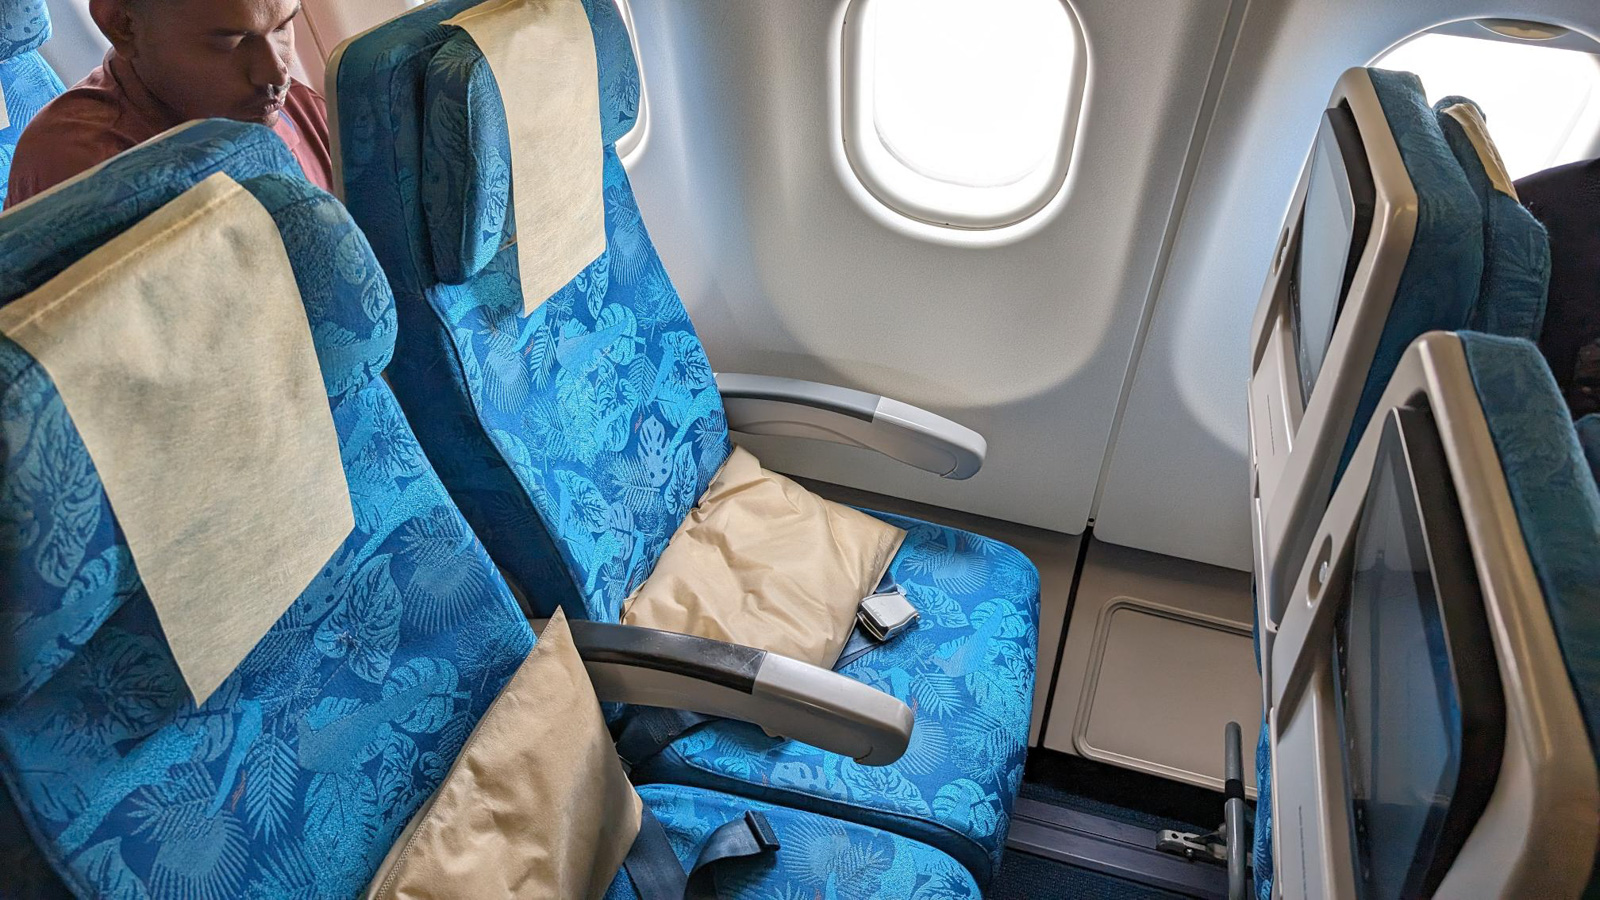 Economy seat on SriLankan Airlines Airbus A330-200